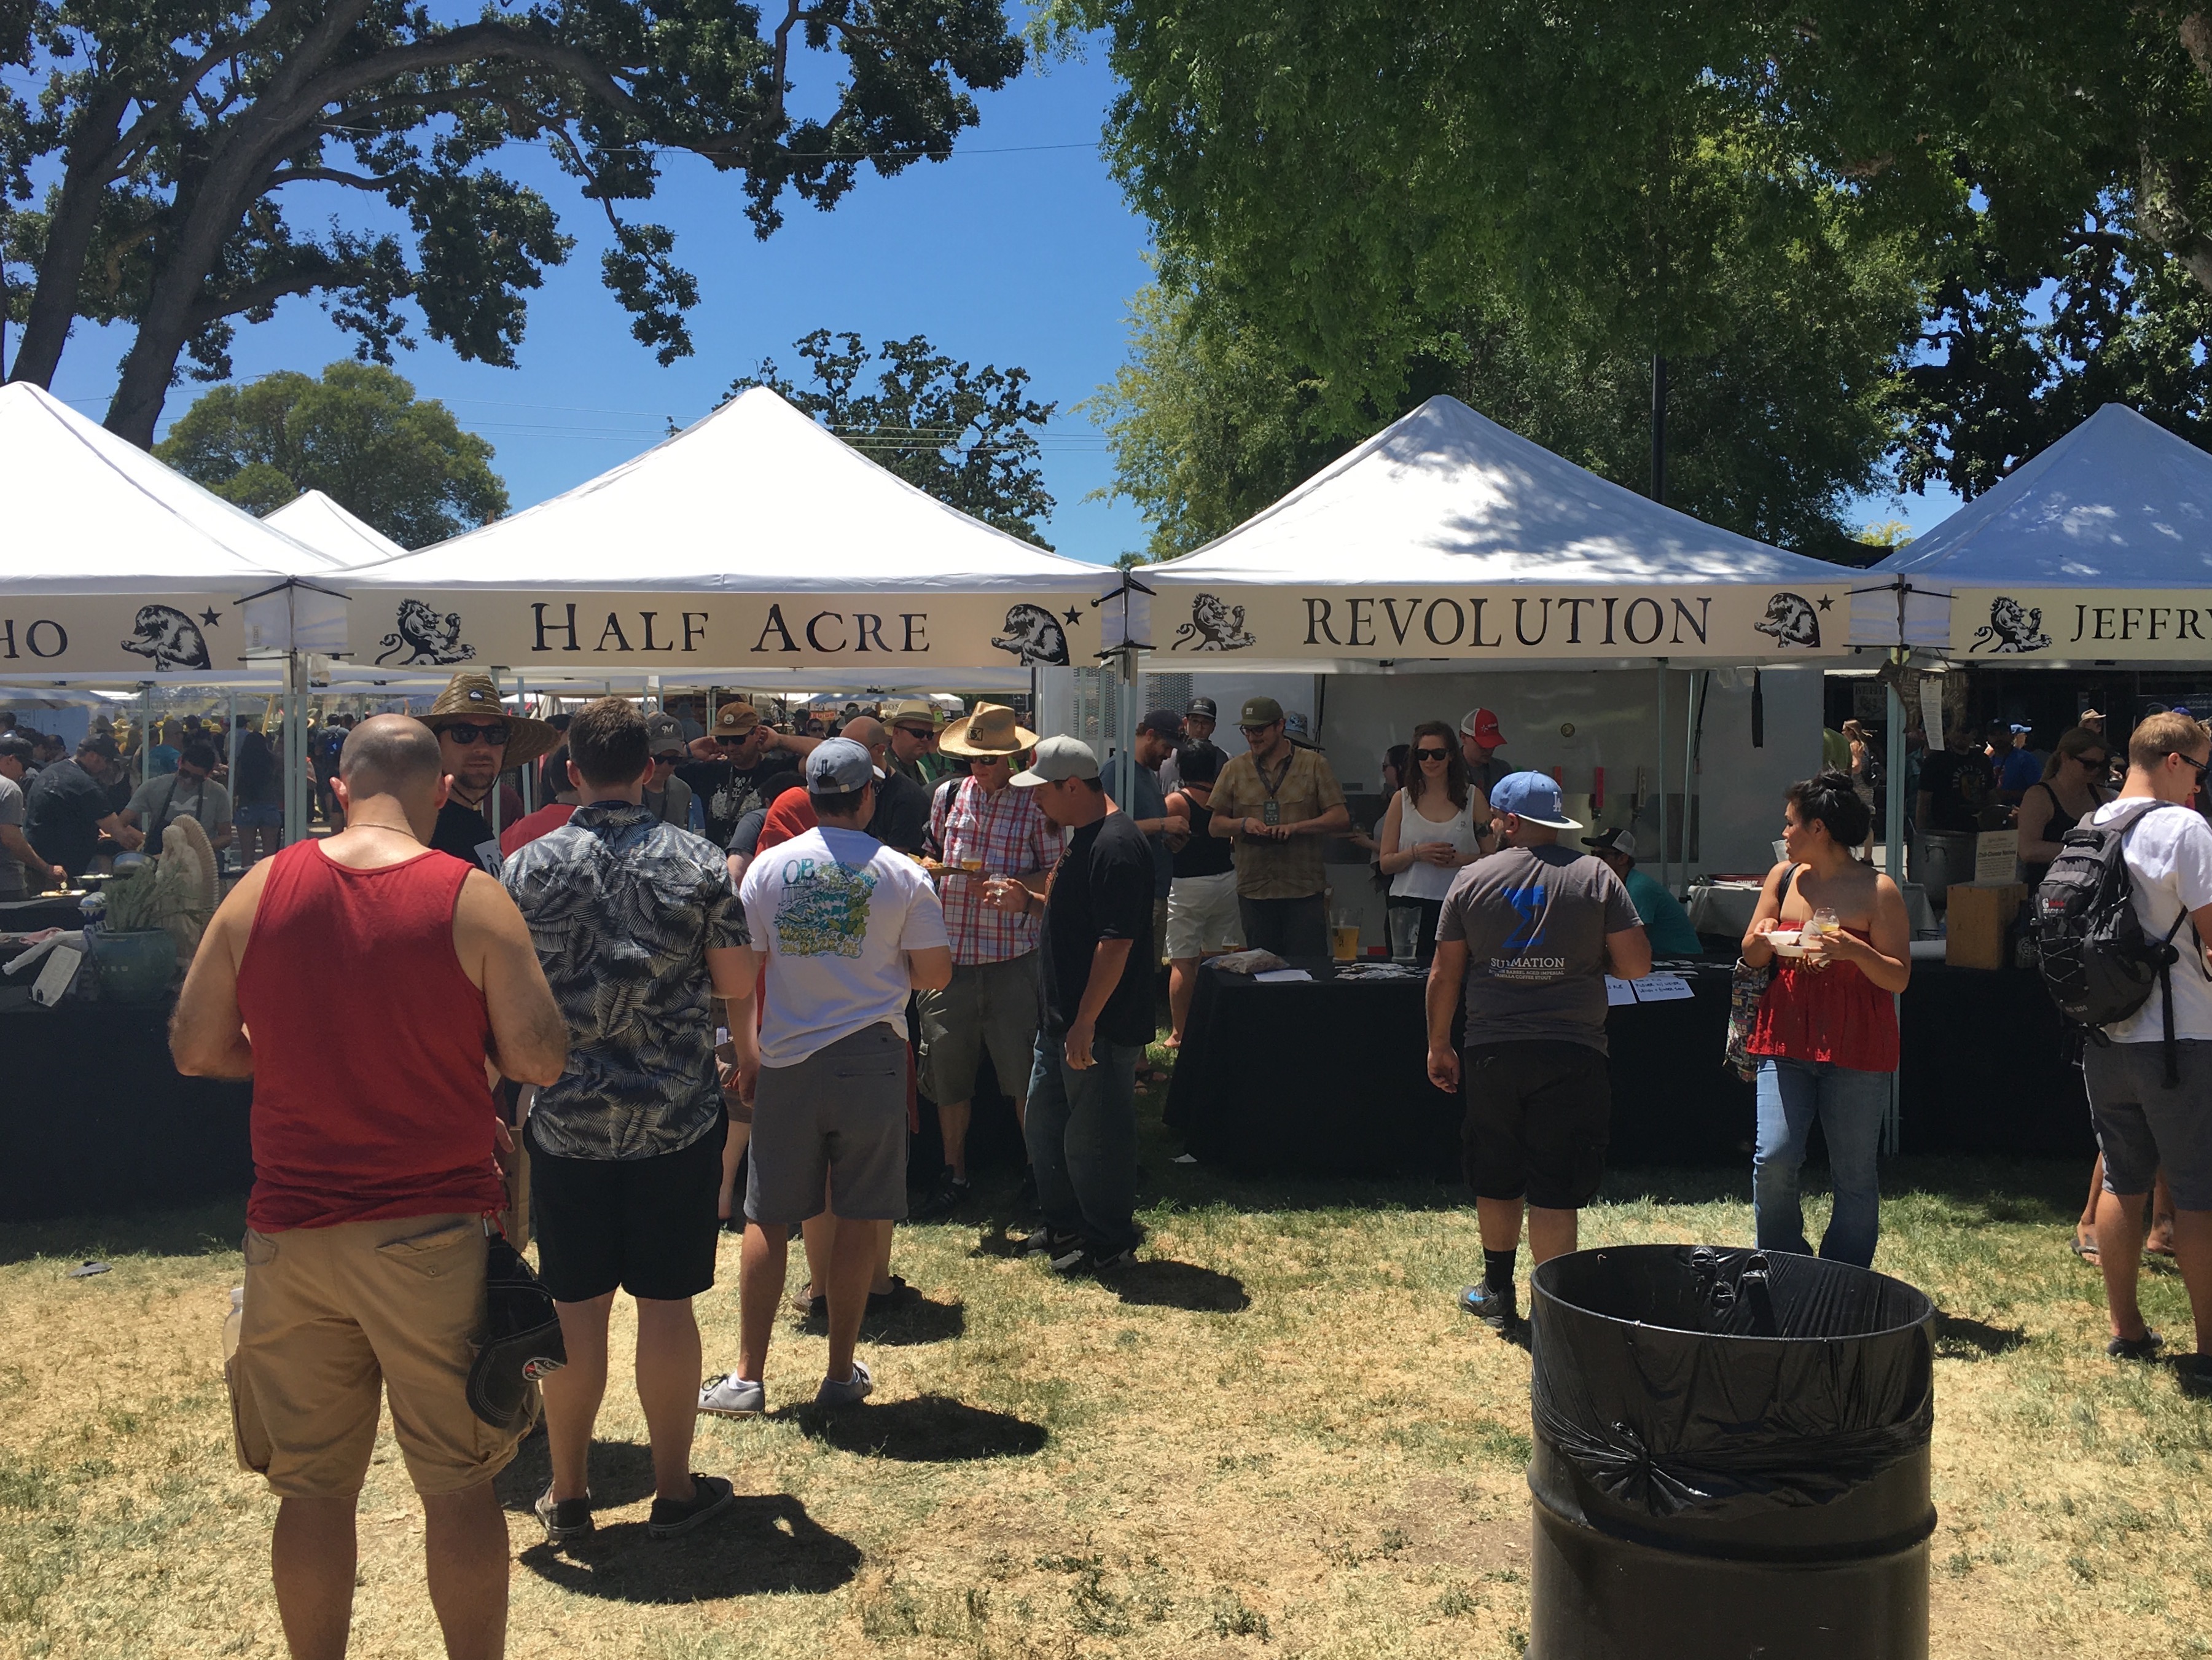 Half Acre Beer Co. and Revolution Brewing, two Chicago breweries pouring at the 2016 Firestone Walker Invitational Beer Fest.